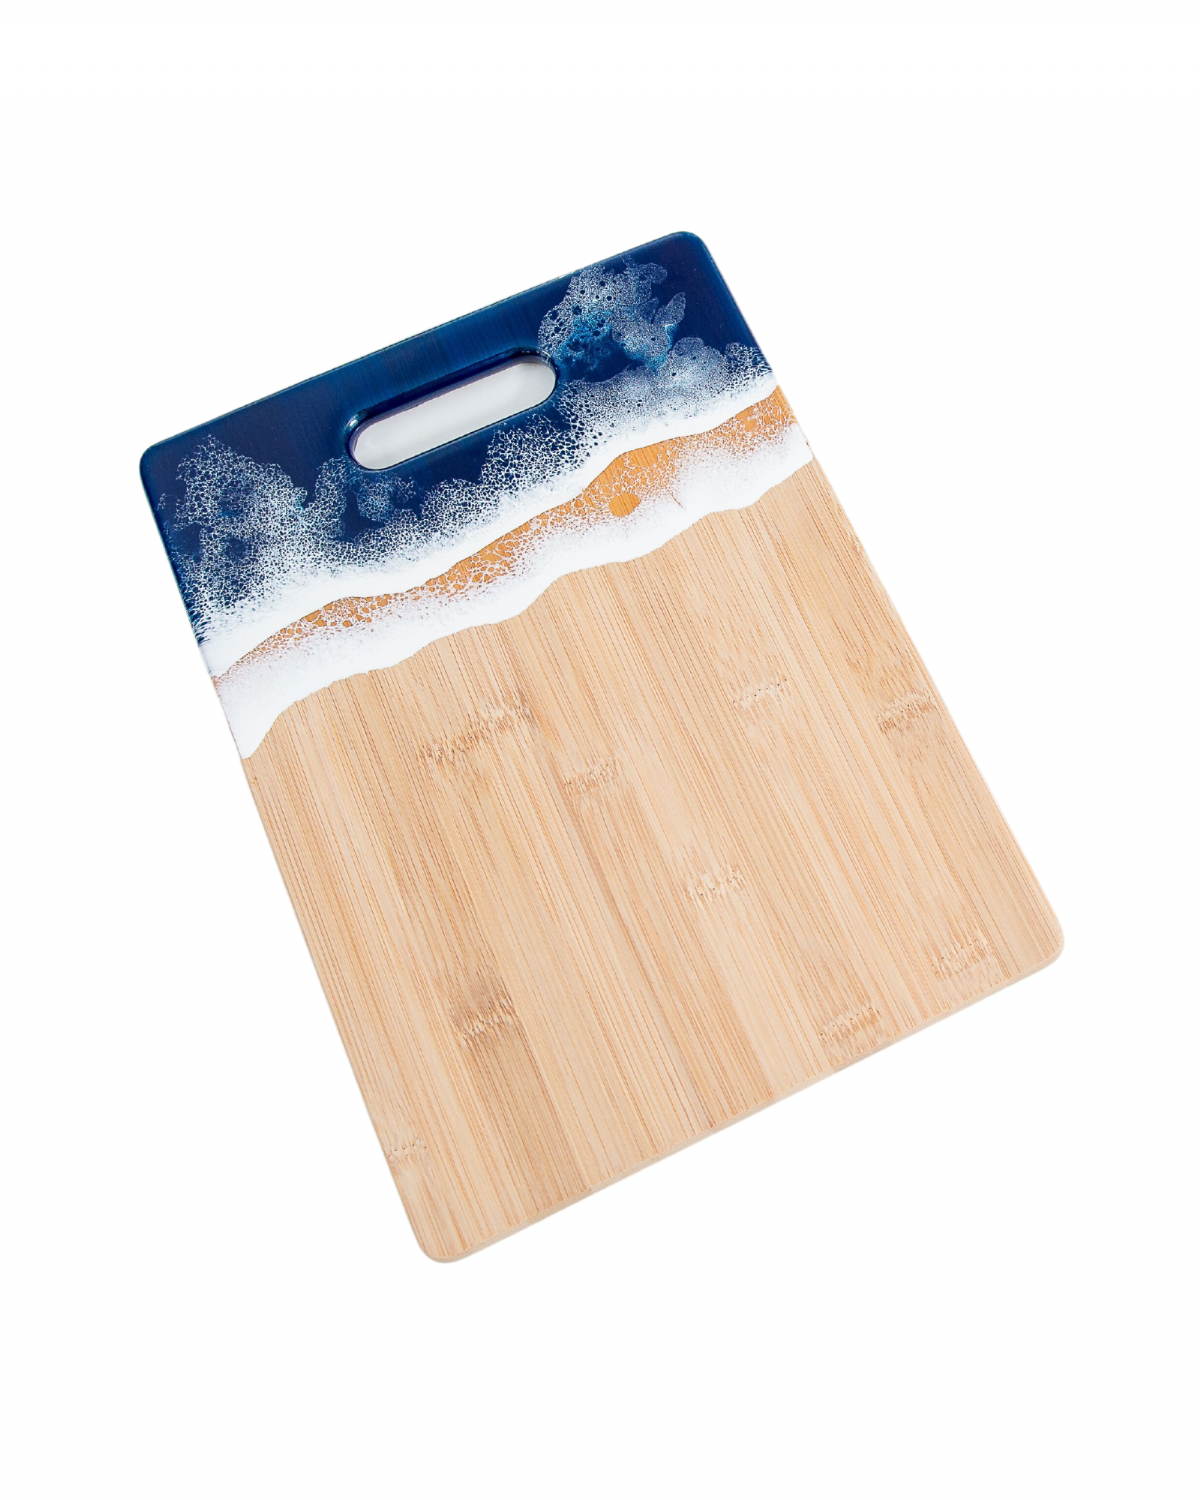 Lipper International 8841 Bamboo Wood Over-the-Sink Expandable Cutting  Board, 34 x 11 1/2 x 3/4